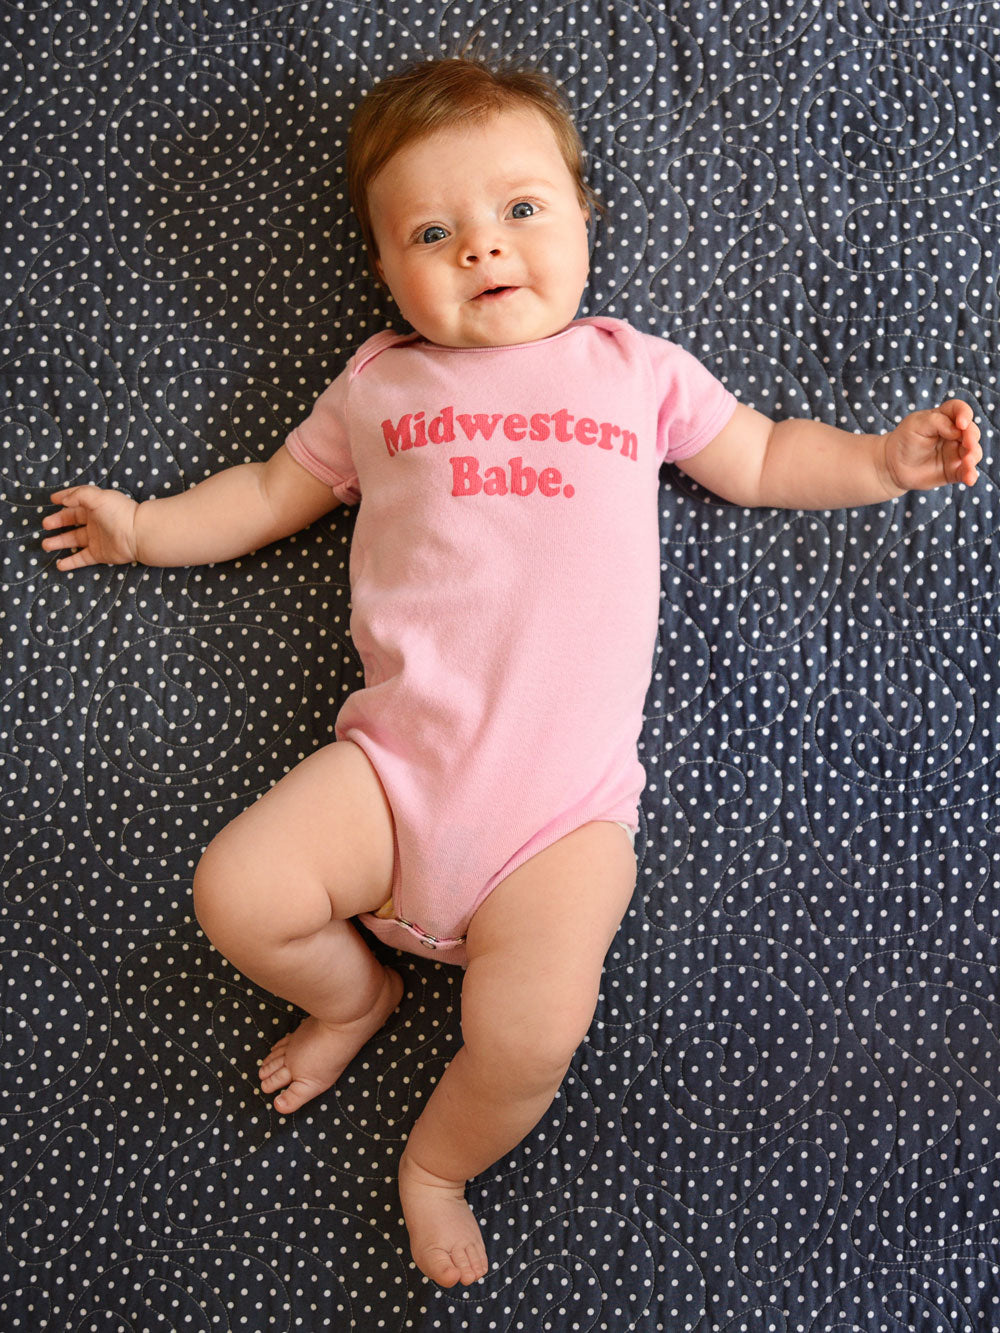 Midwestern Babe pink infant bodysuit on baby on navy blanket